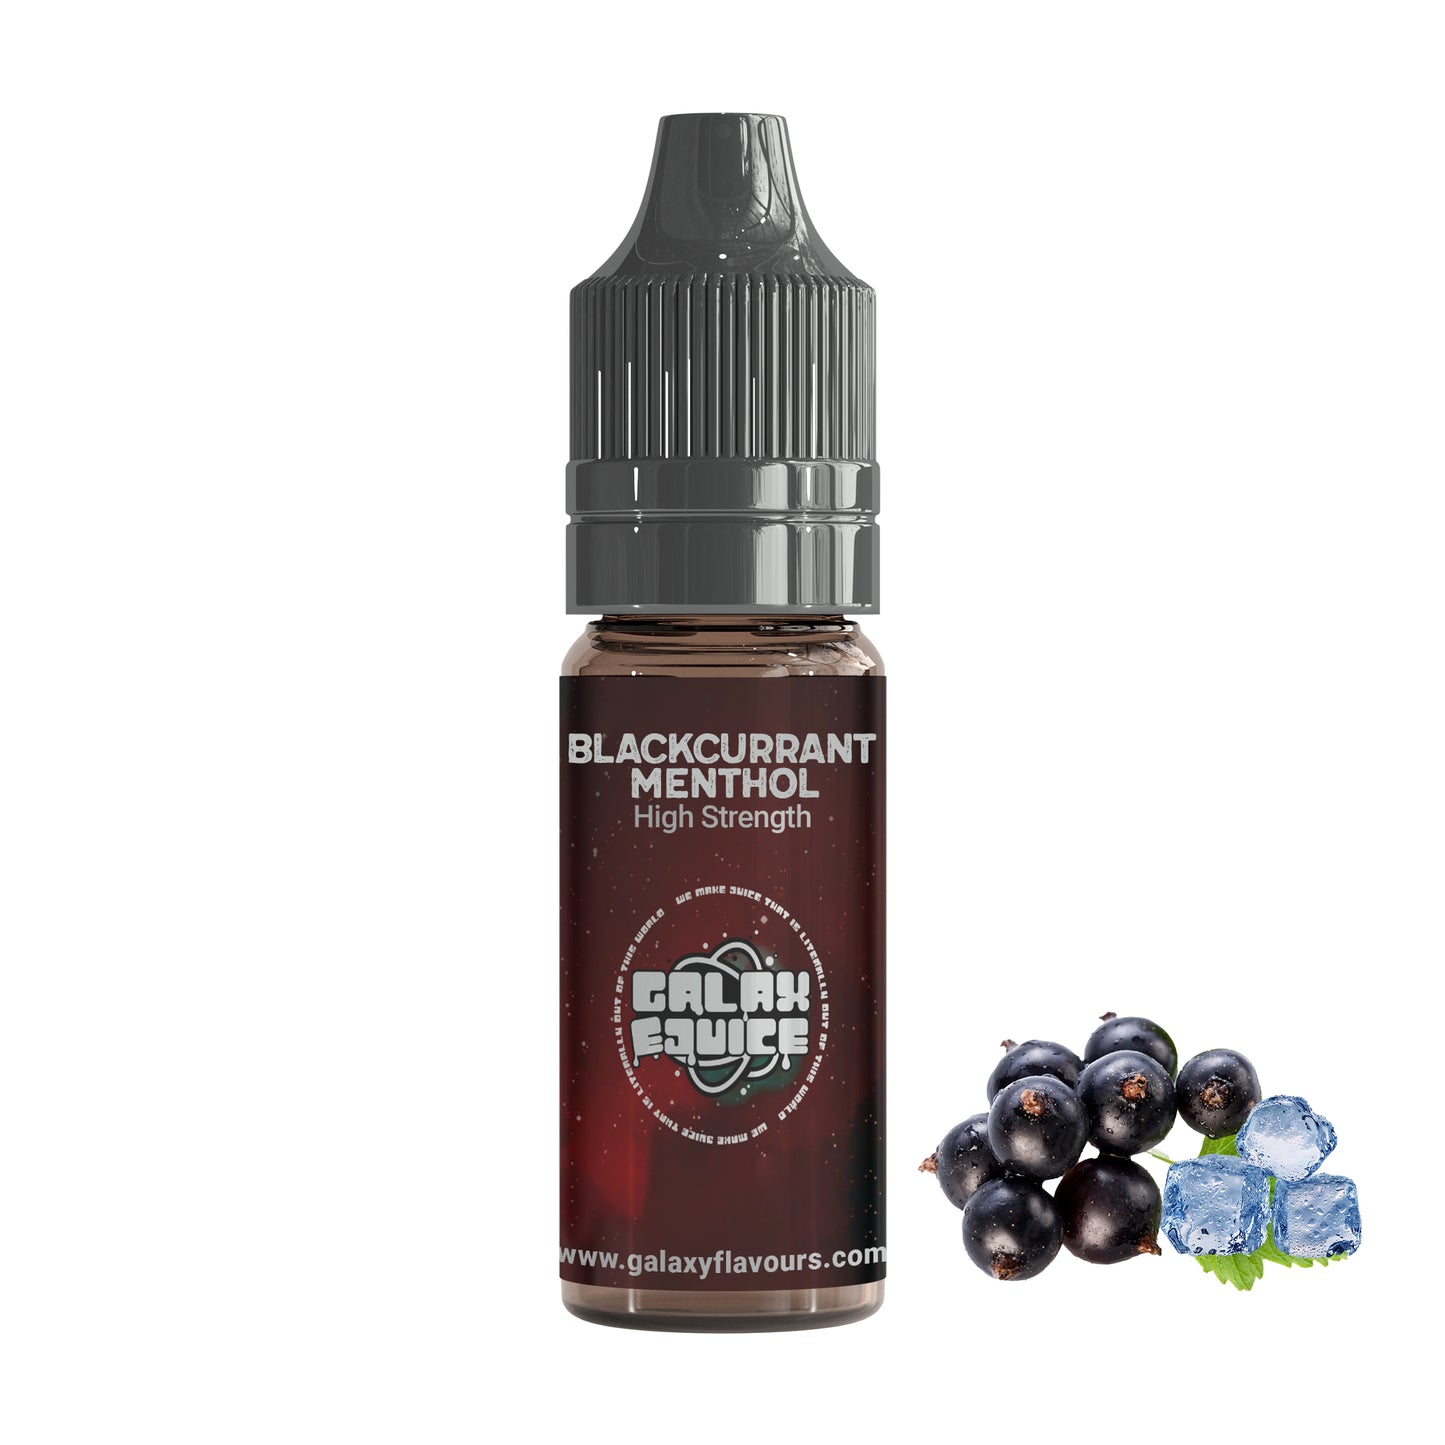 Blackcurrant Menthol High Strength Professional Flavouring.